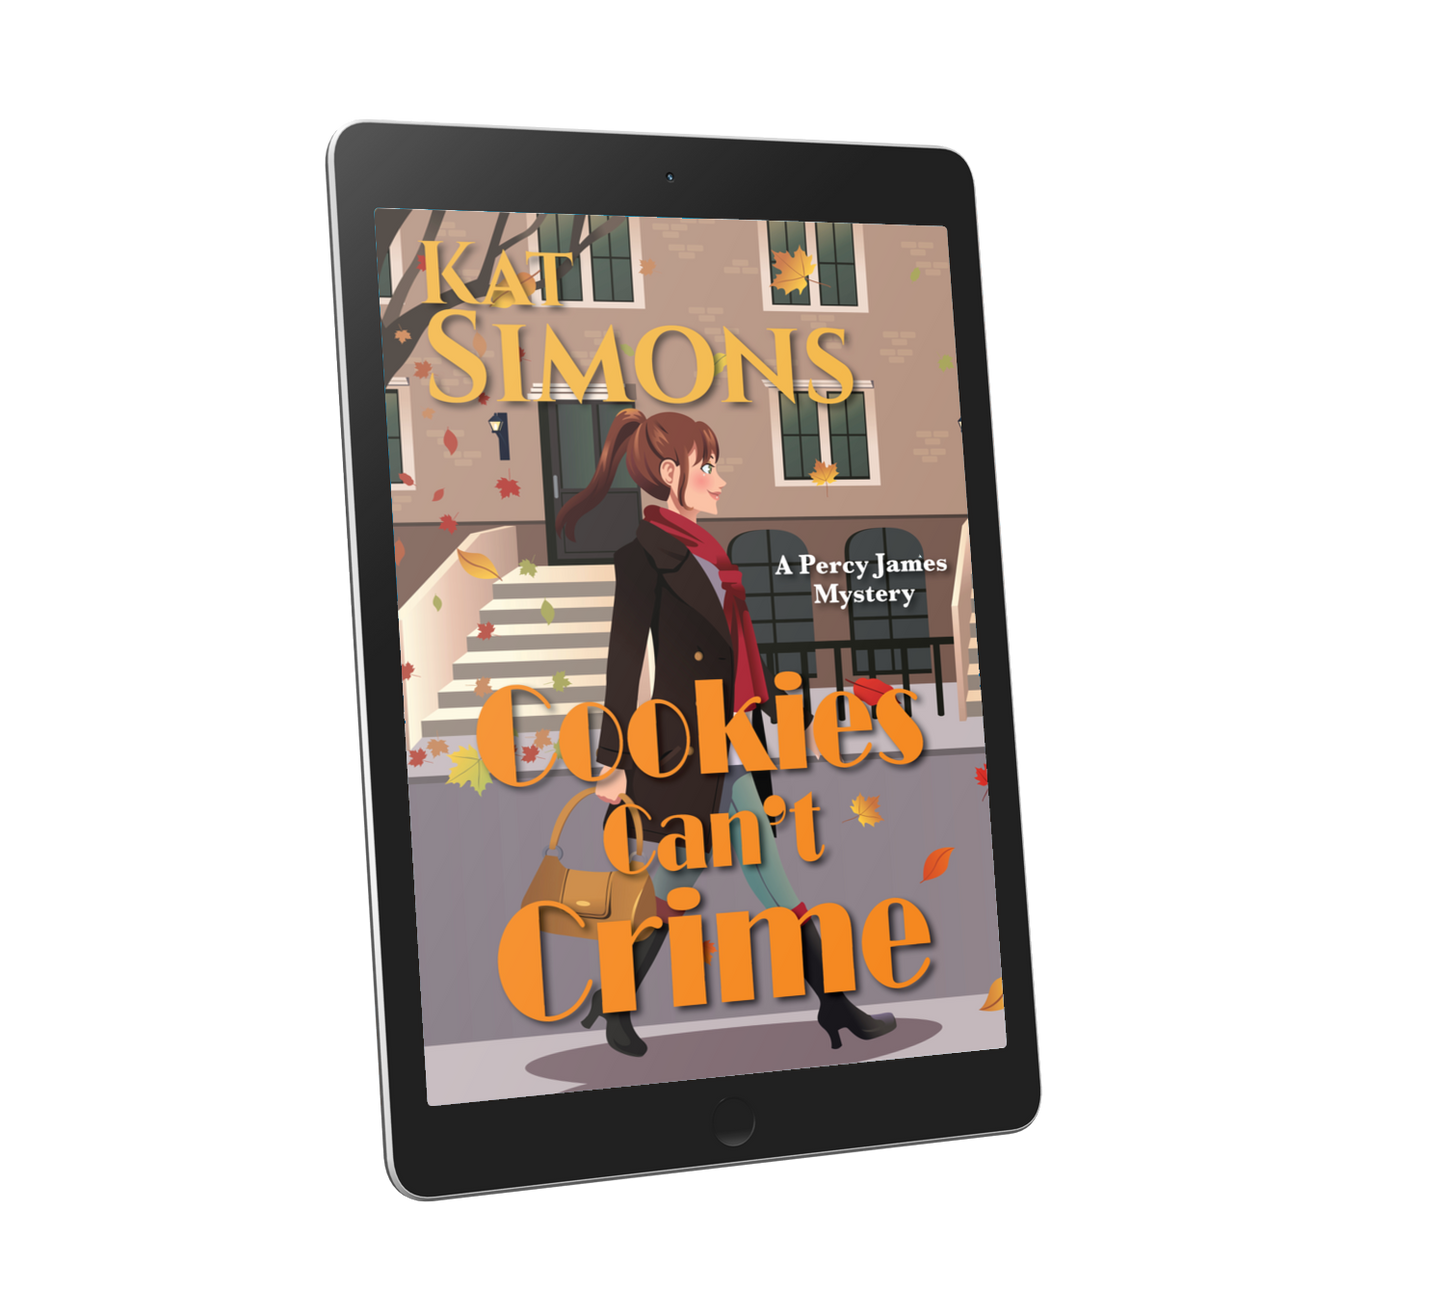 illustrated cover for Cookies Can't Crime, with image of young woman walking along city street, in autumn colors, title at bottom, author name at top